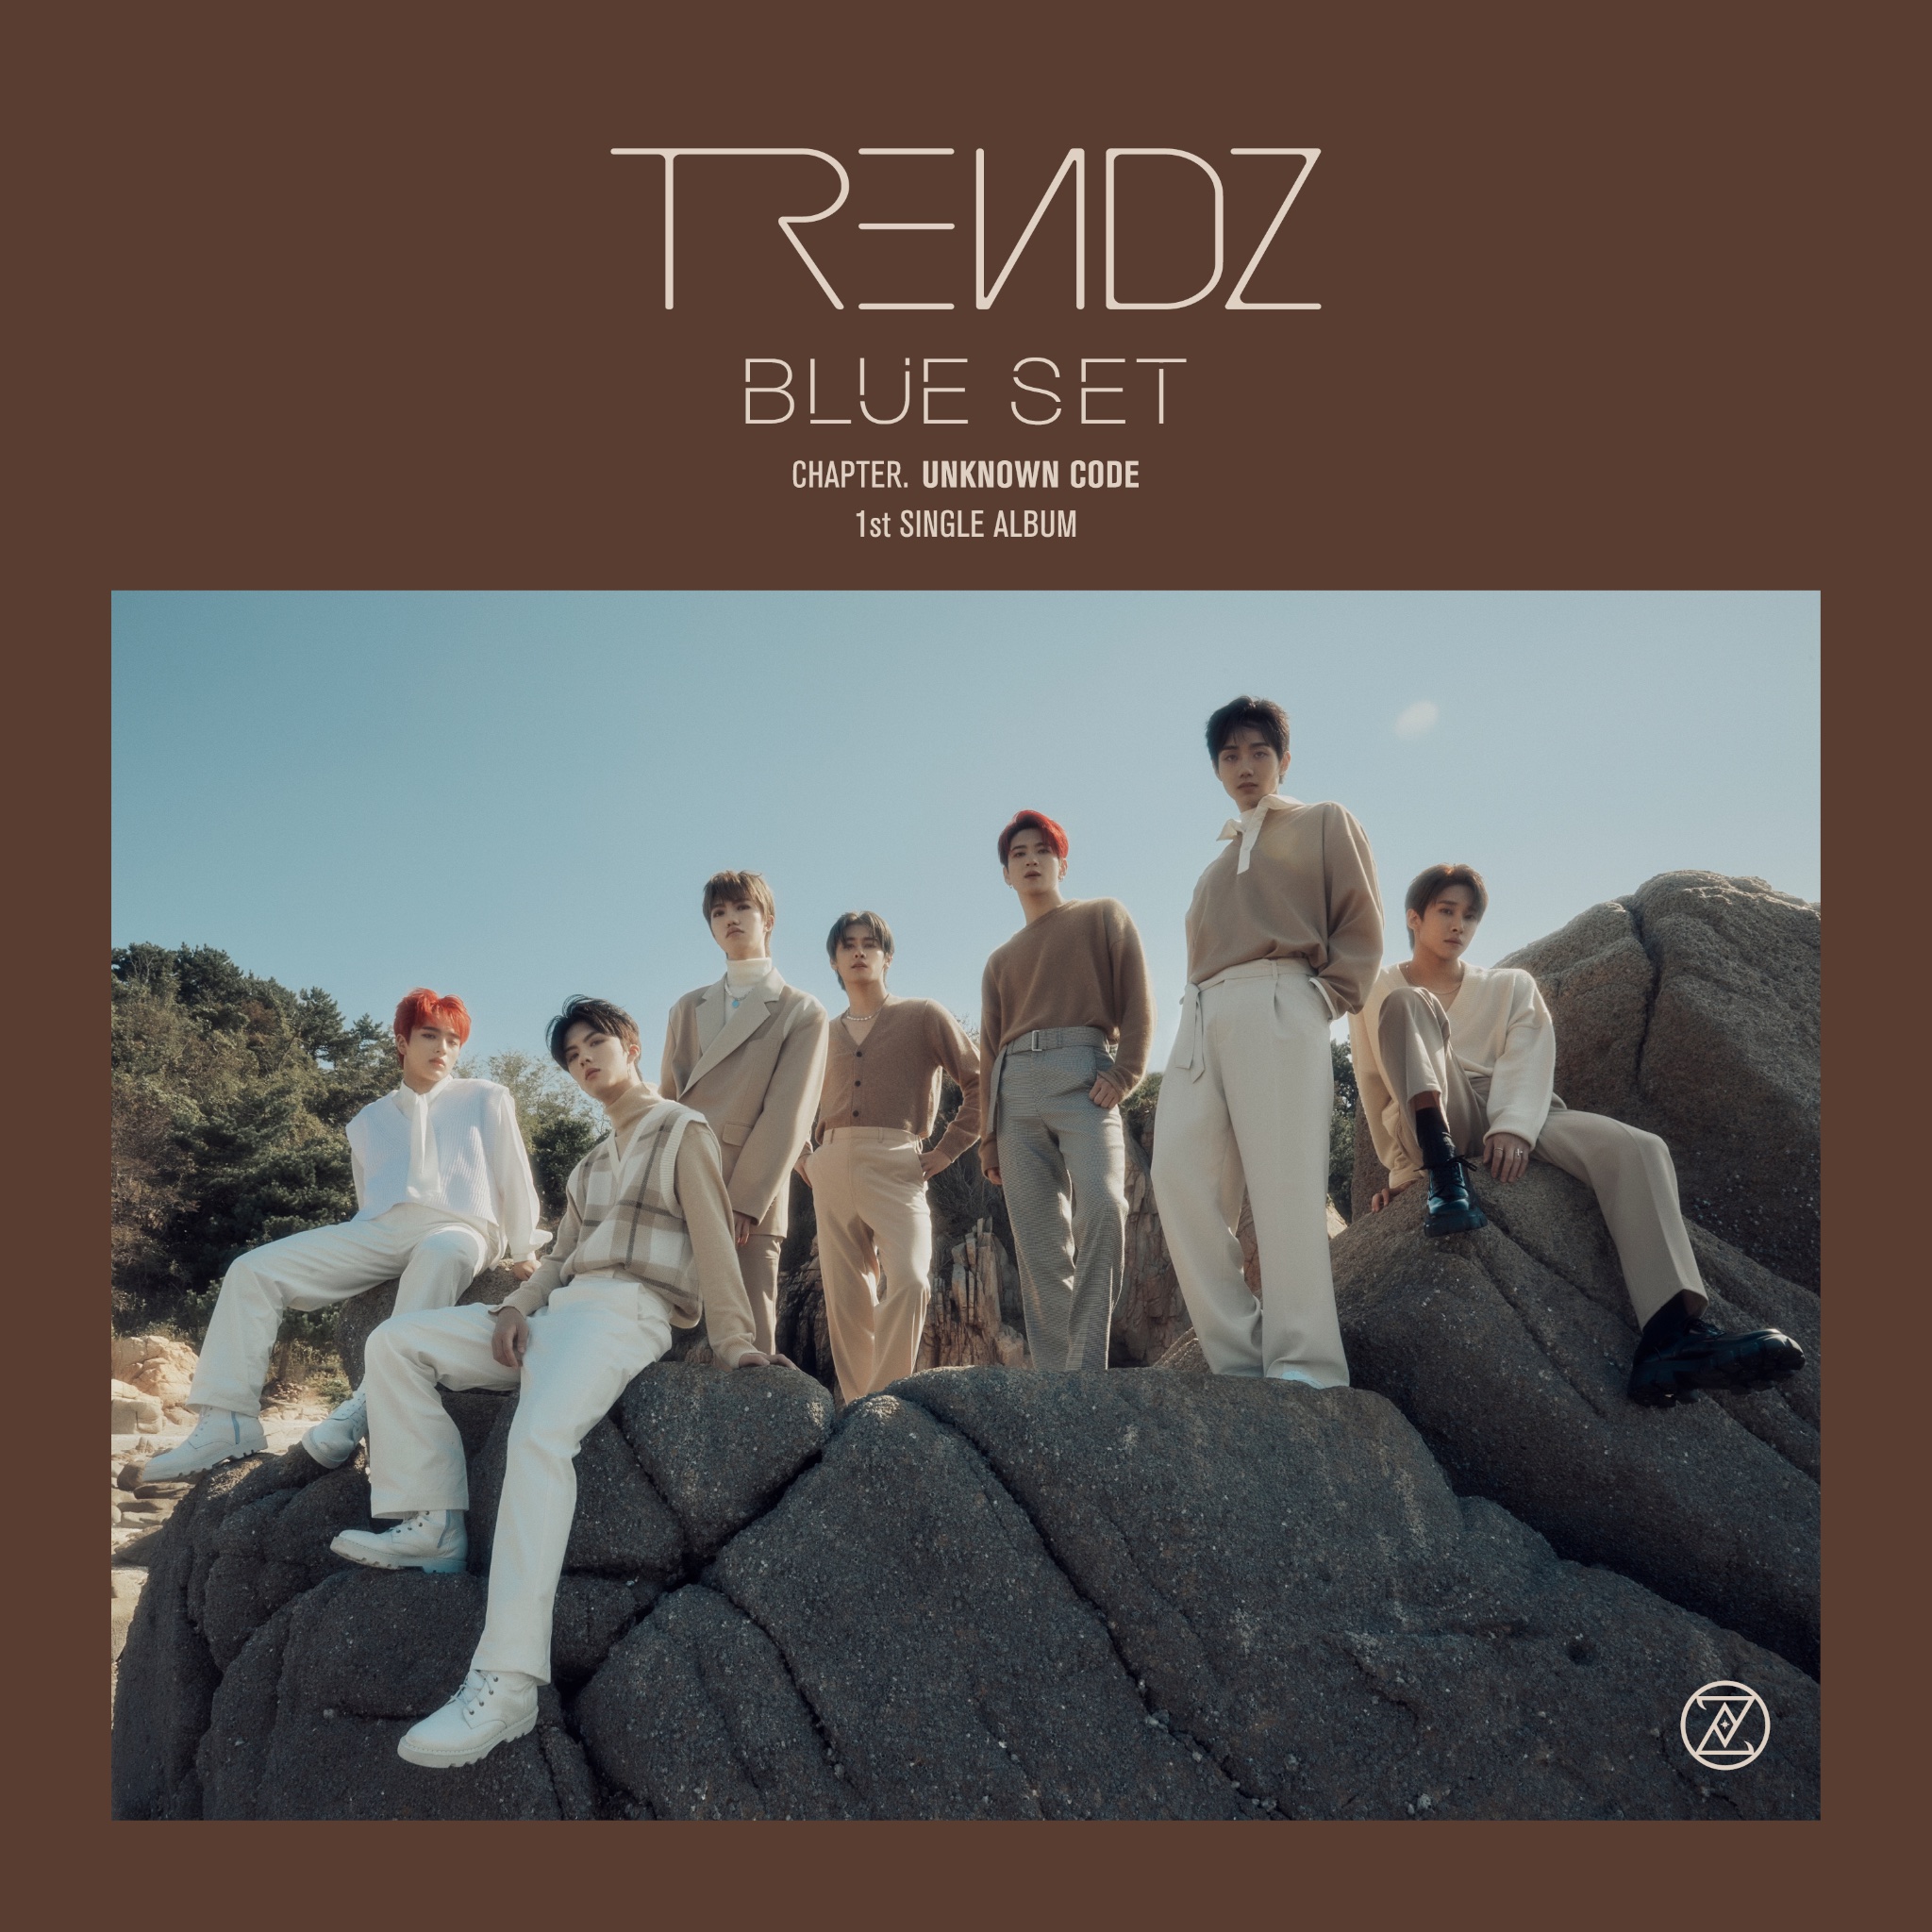 TRENDZ BLUE SET Chapter. [UNKNOWN CODE] cover artwork